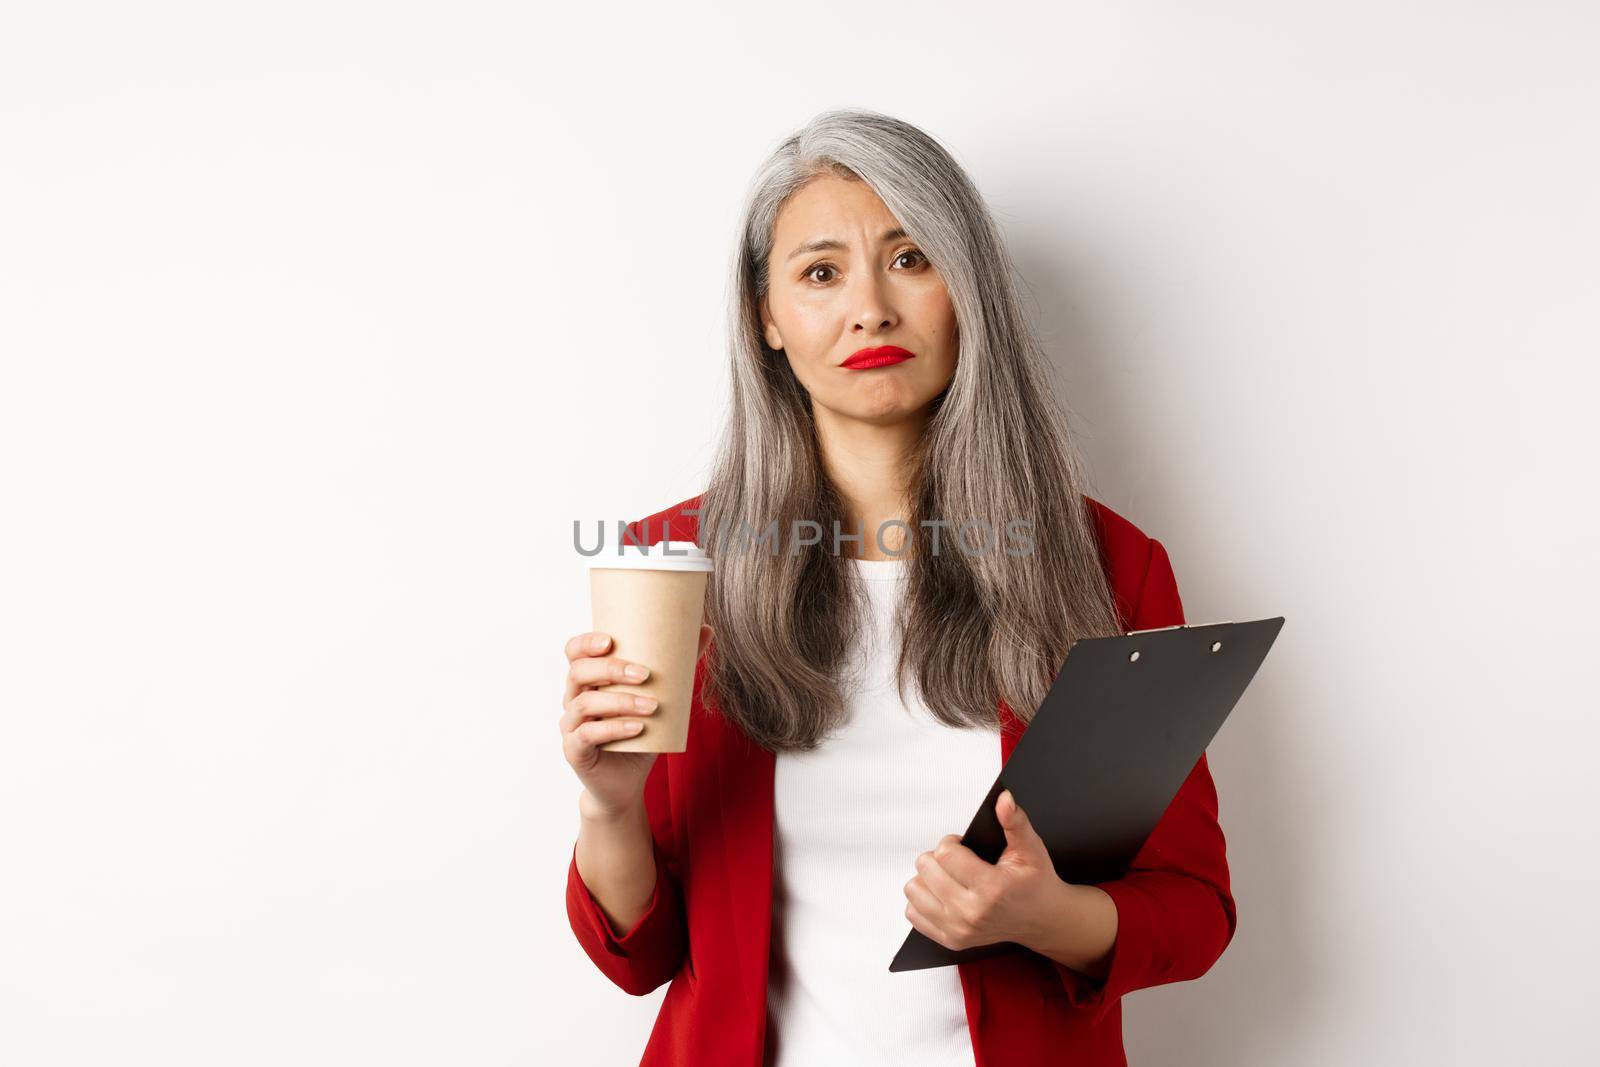 Tired and disappointed asian businesswoman with grey hair, drinking coffee in paper cup and looking gloomy at camera, standing over white background.